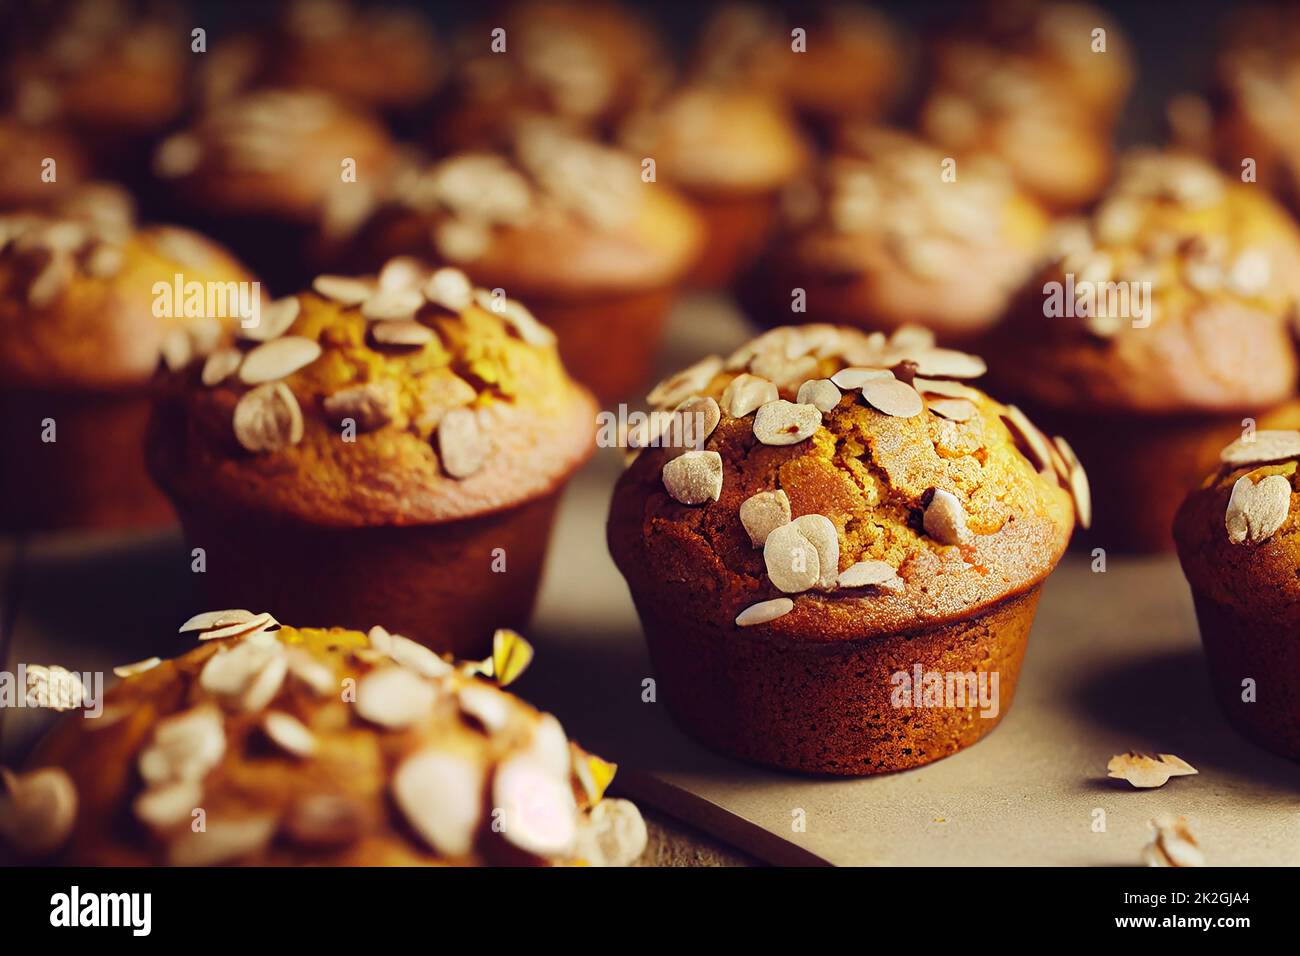 Sweet homemade healthy pumpkin muffins, vegan baked food, autumn dessert, traditional fall recipe idea, food photography and illustration Stock Photo